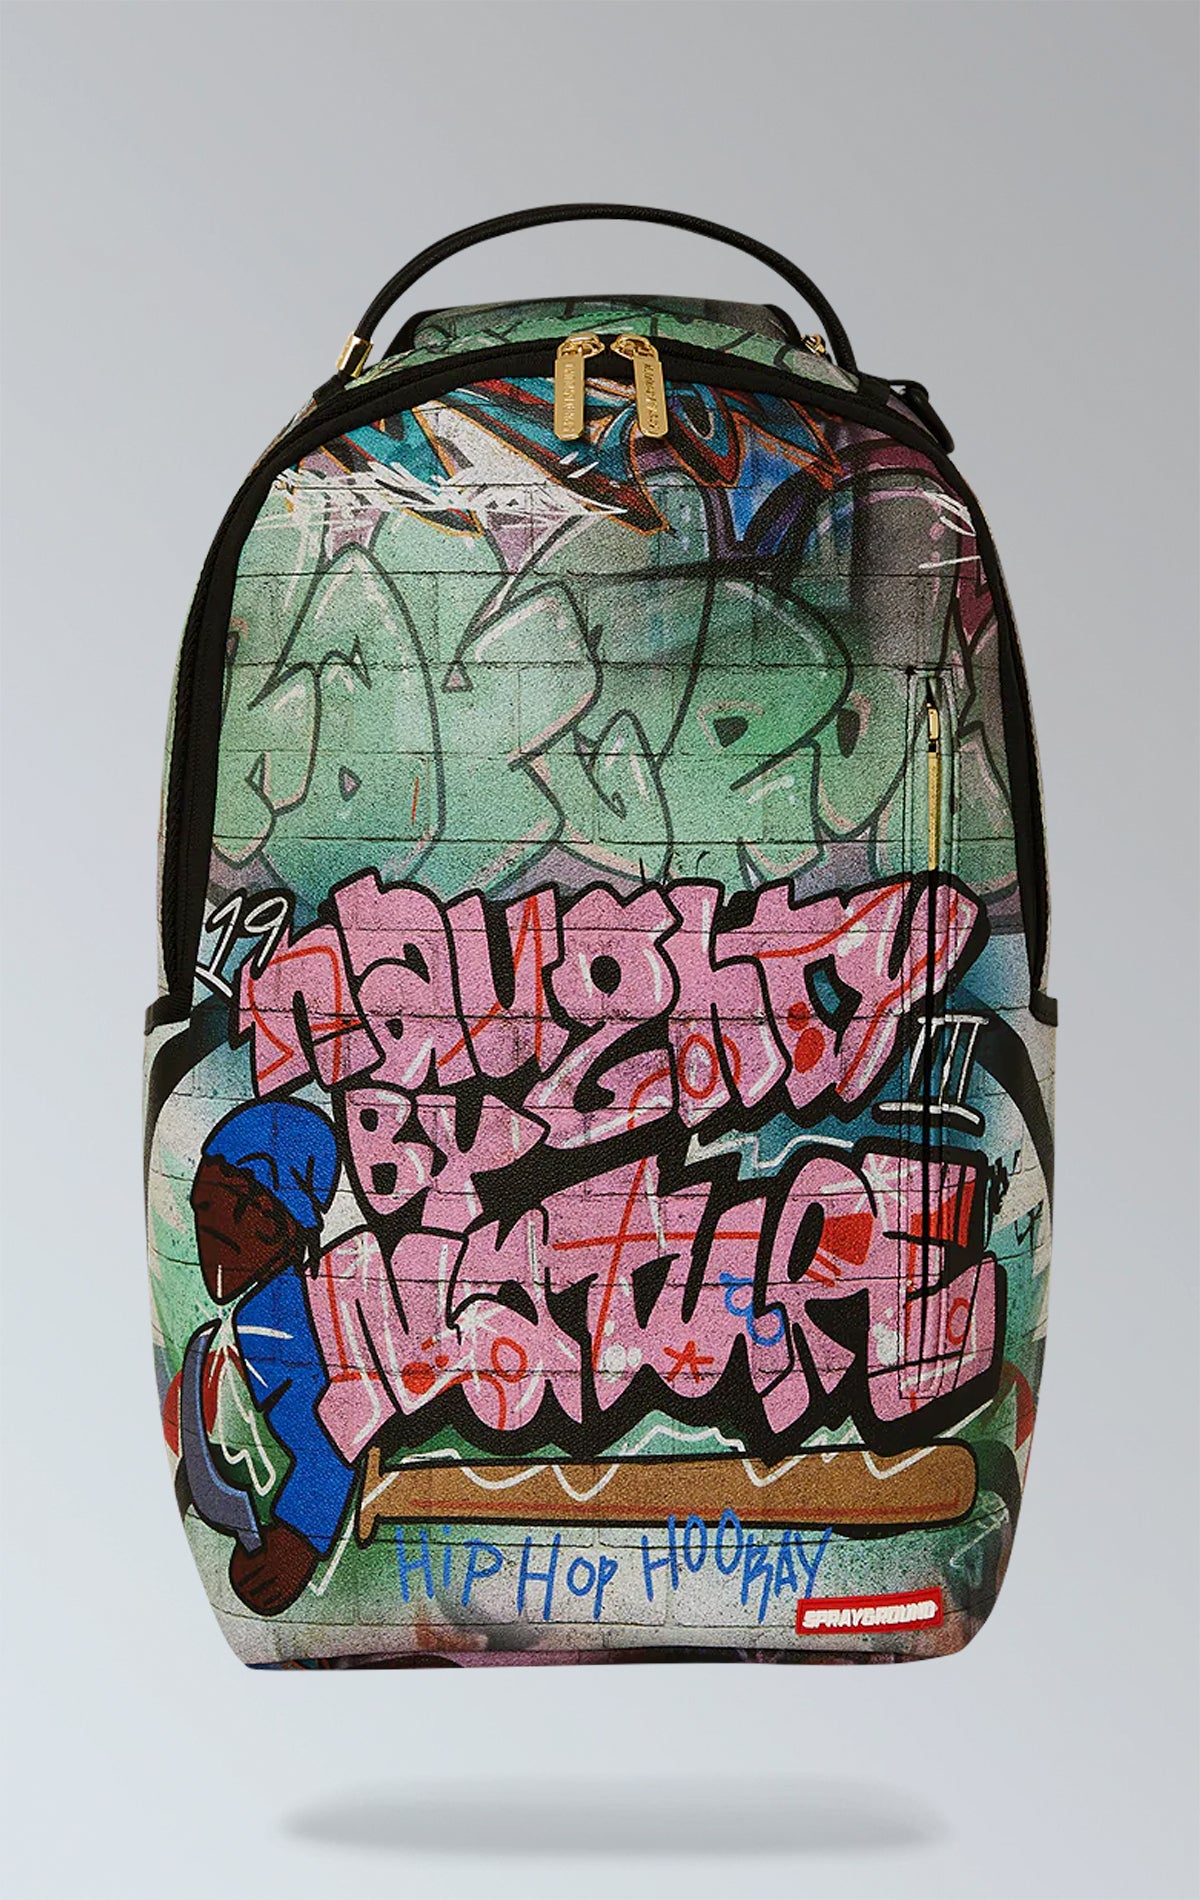 Sprayground  limited-edition backpack celebration of 30 years of hip-hop group Naughty by Nature. It features a bold and vibrant design with the iconic Naughty by Nature logo and graphics from their album "Hip Hop Hooray."